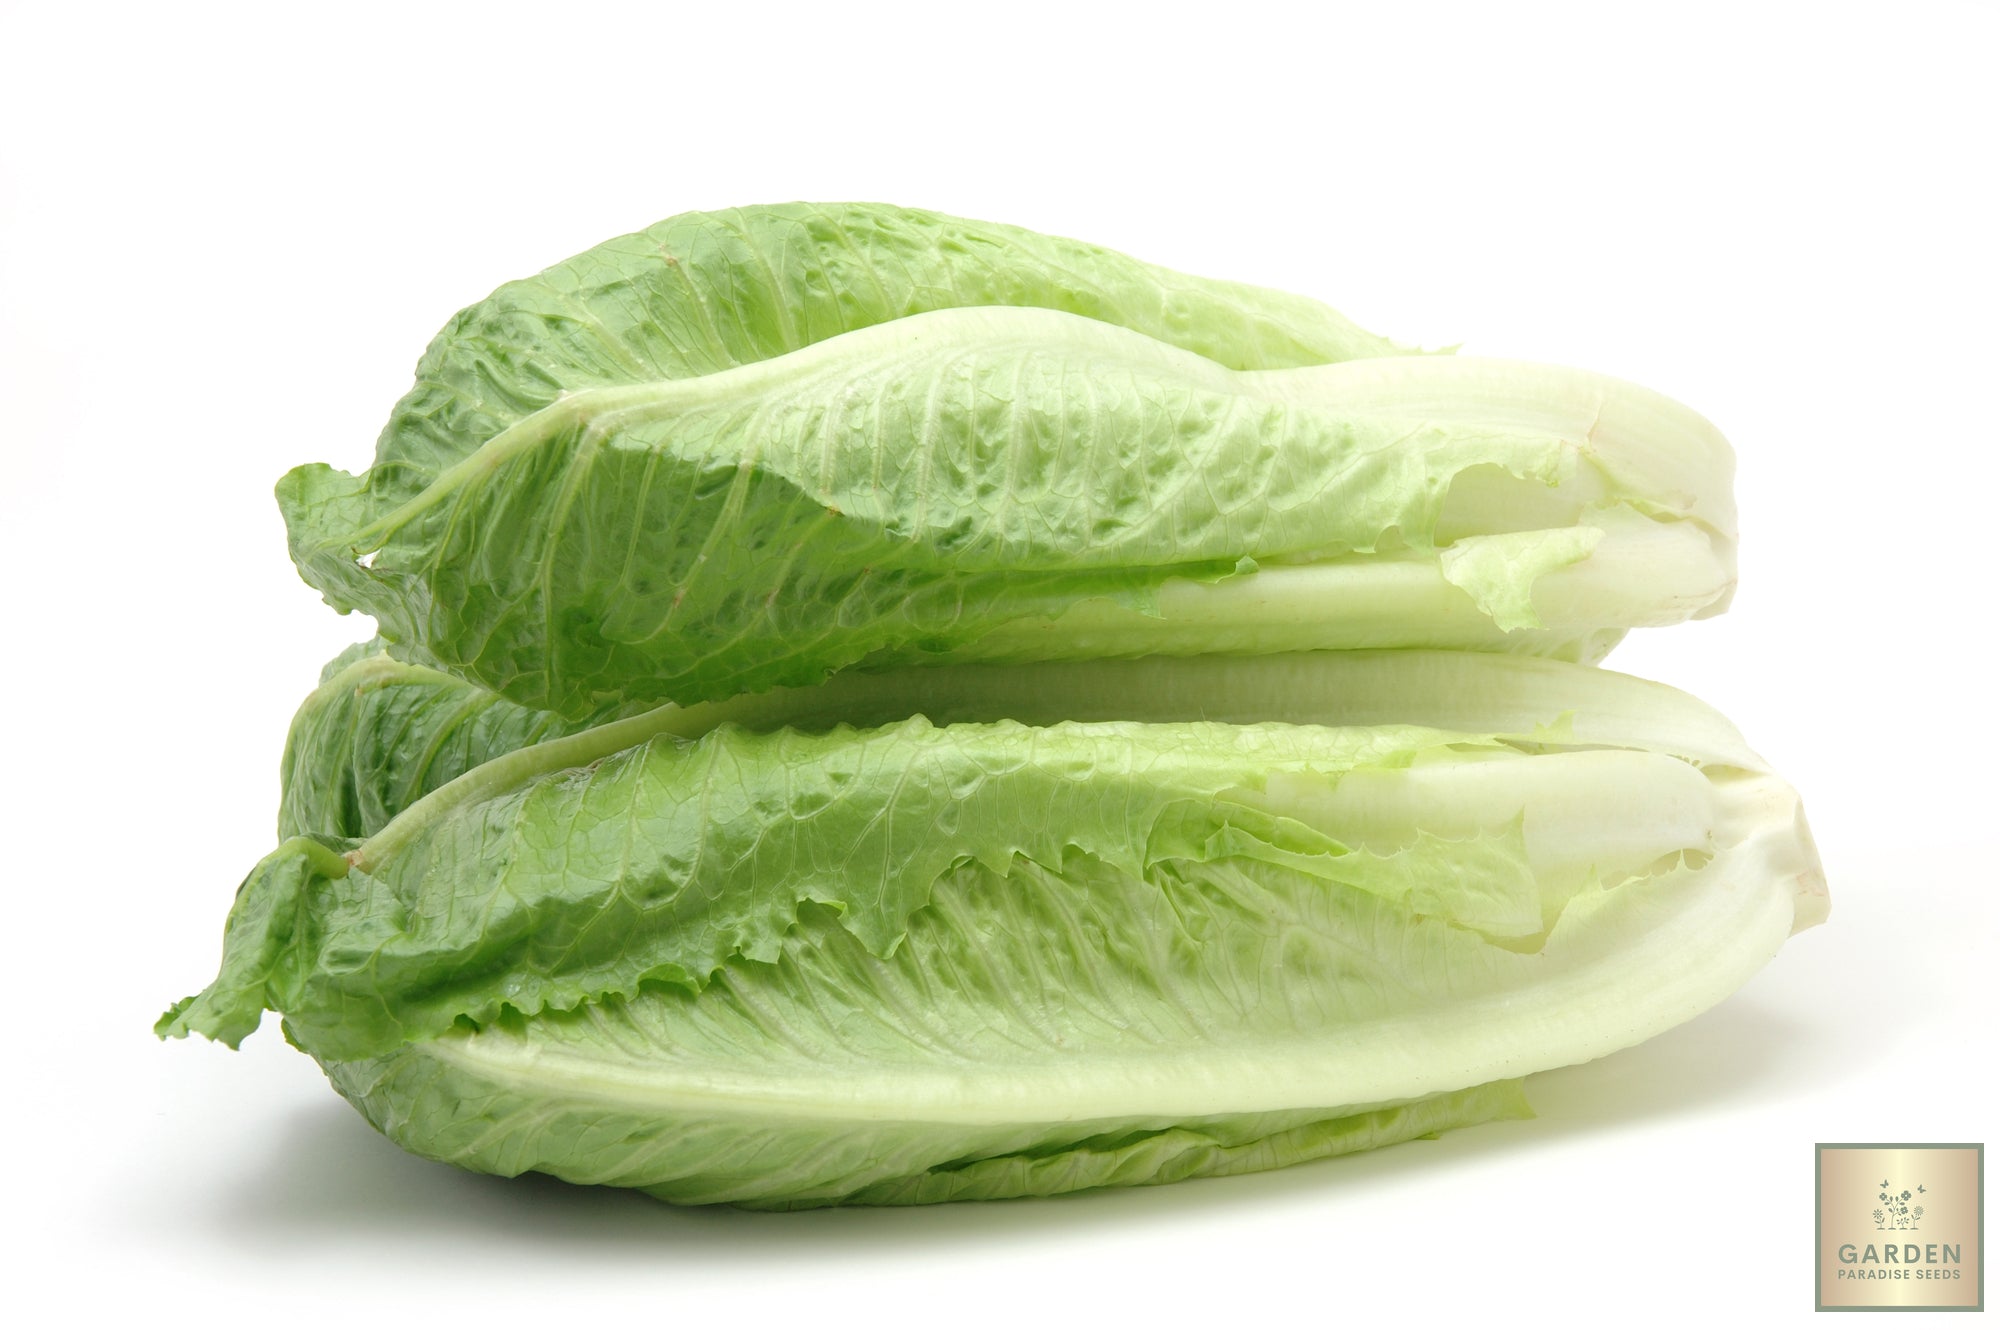 Crisp & Fresh Green Romaine Lettuce Seeds - Grow flavorful and nutritious lettuce in your garden